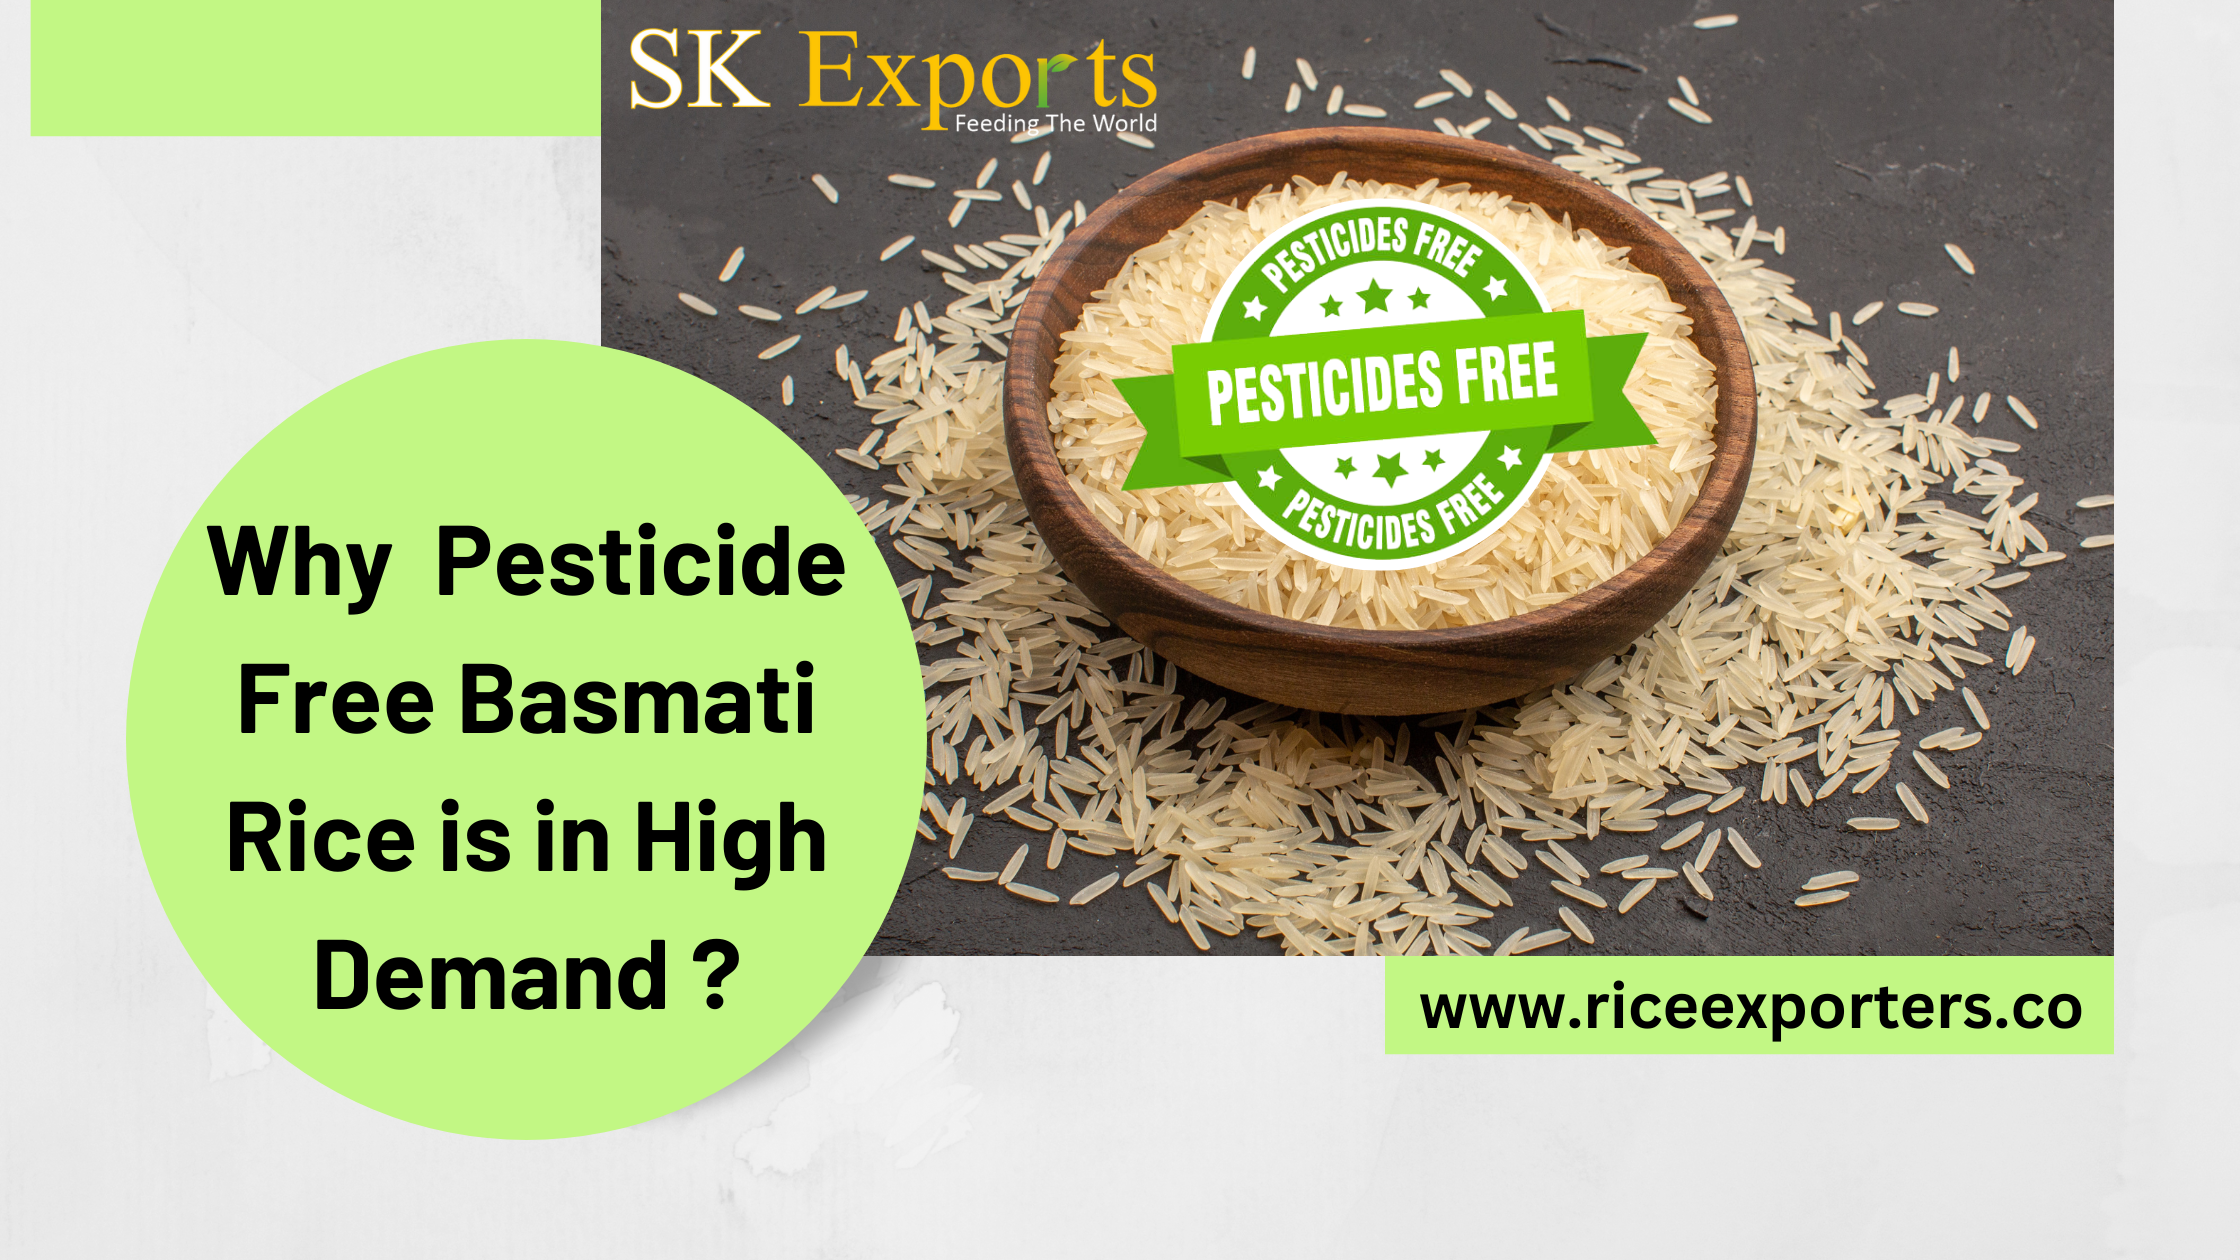 Growing Demand for Pesticide Residue-Free Basmati Rice